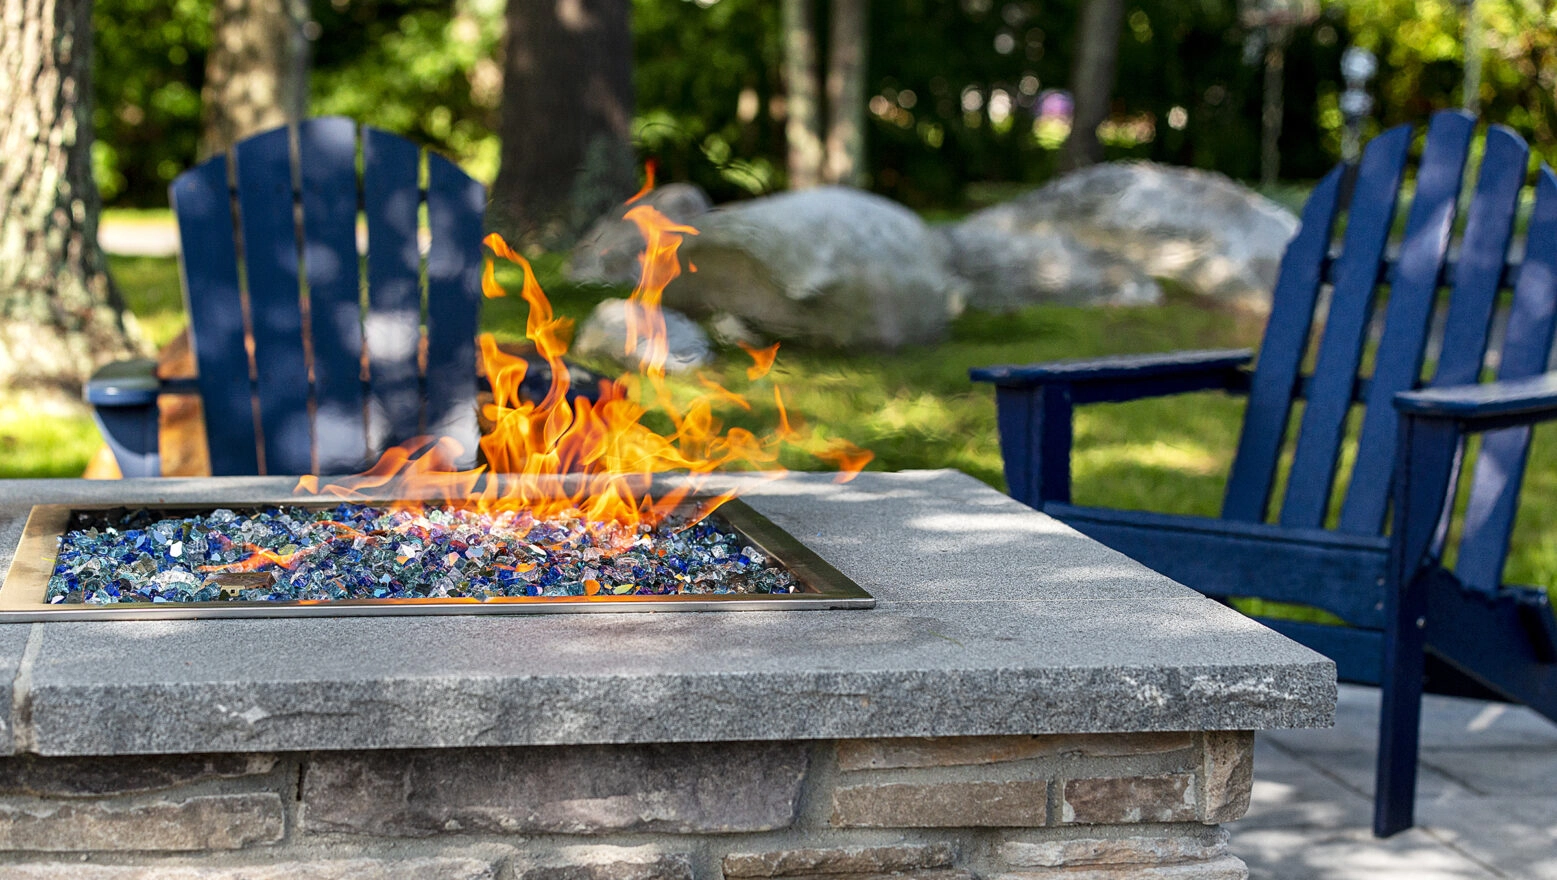 Fire pit with chairs in amenity area at Cranmore Ridge Apartments in Concord, NH. Dex by Terra Masonry & Hardscape project.